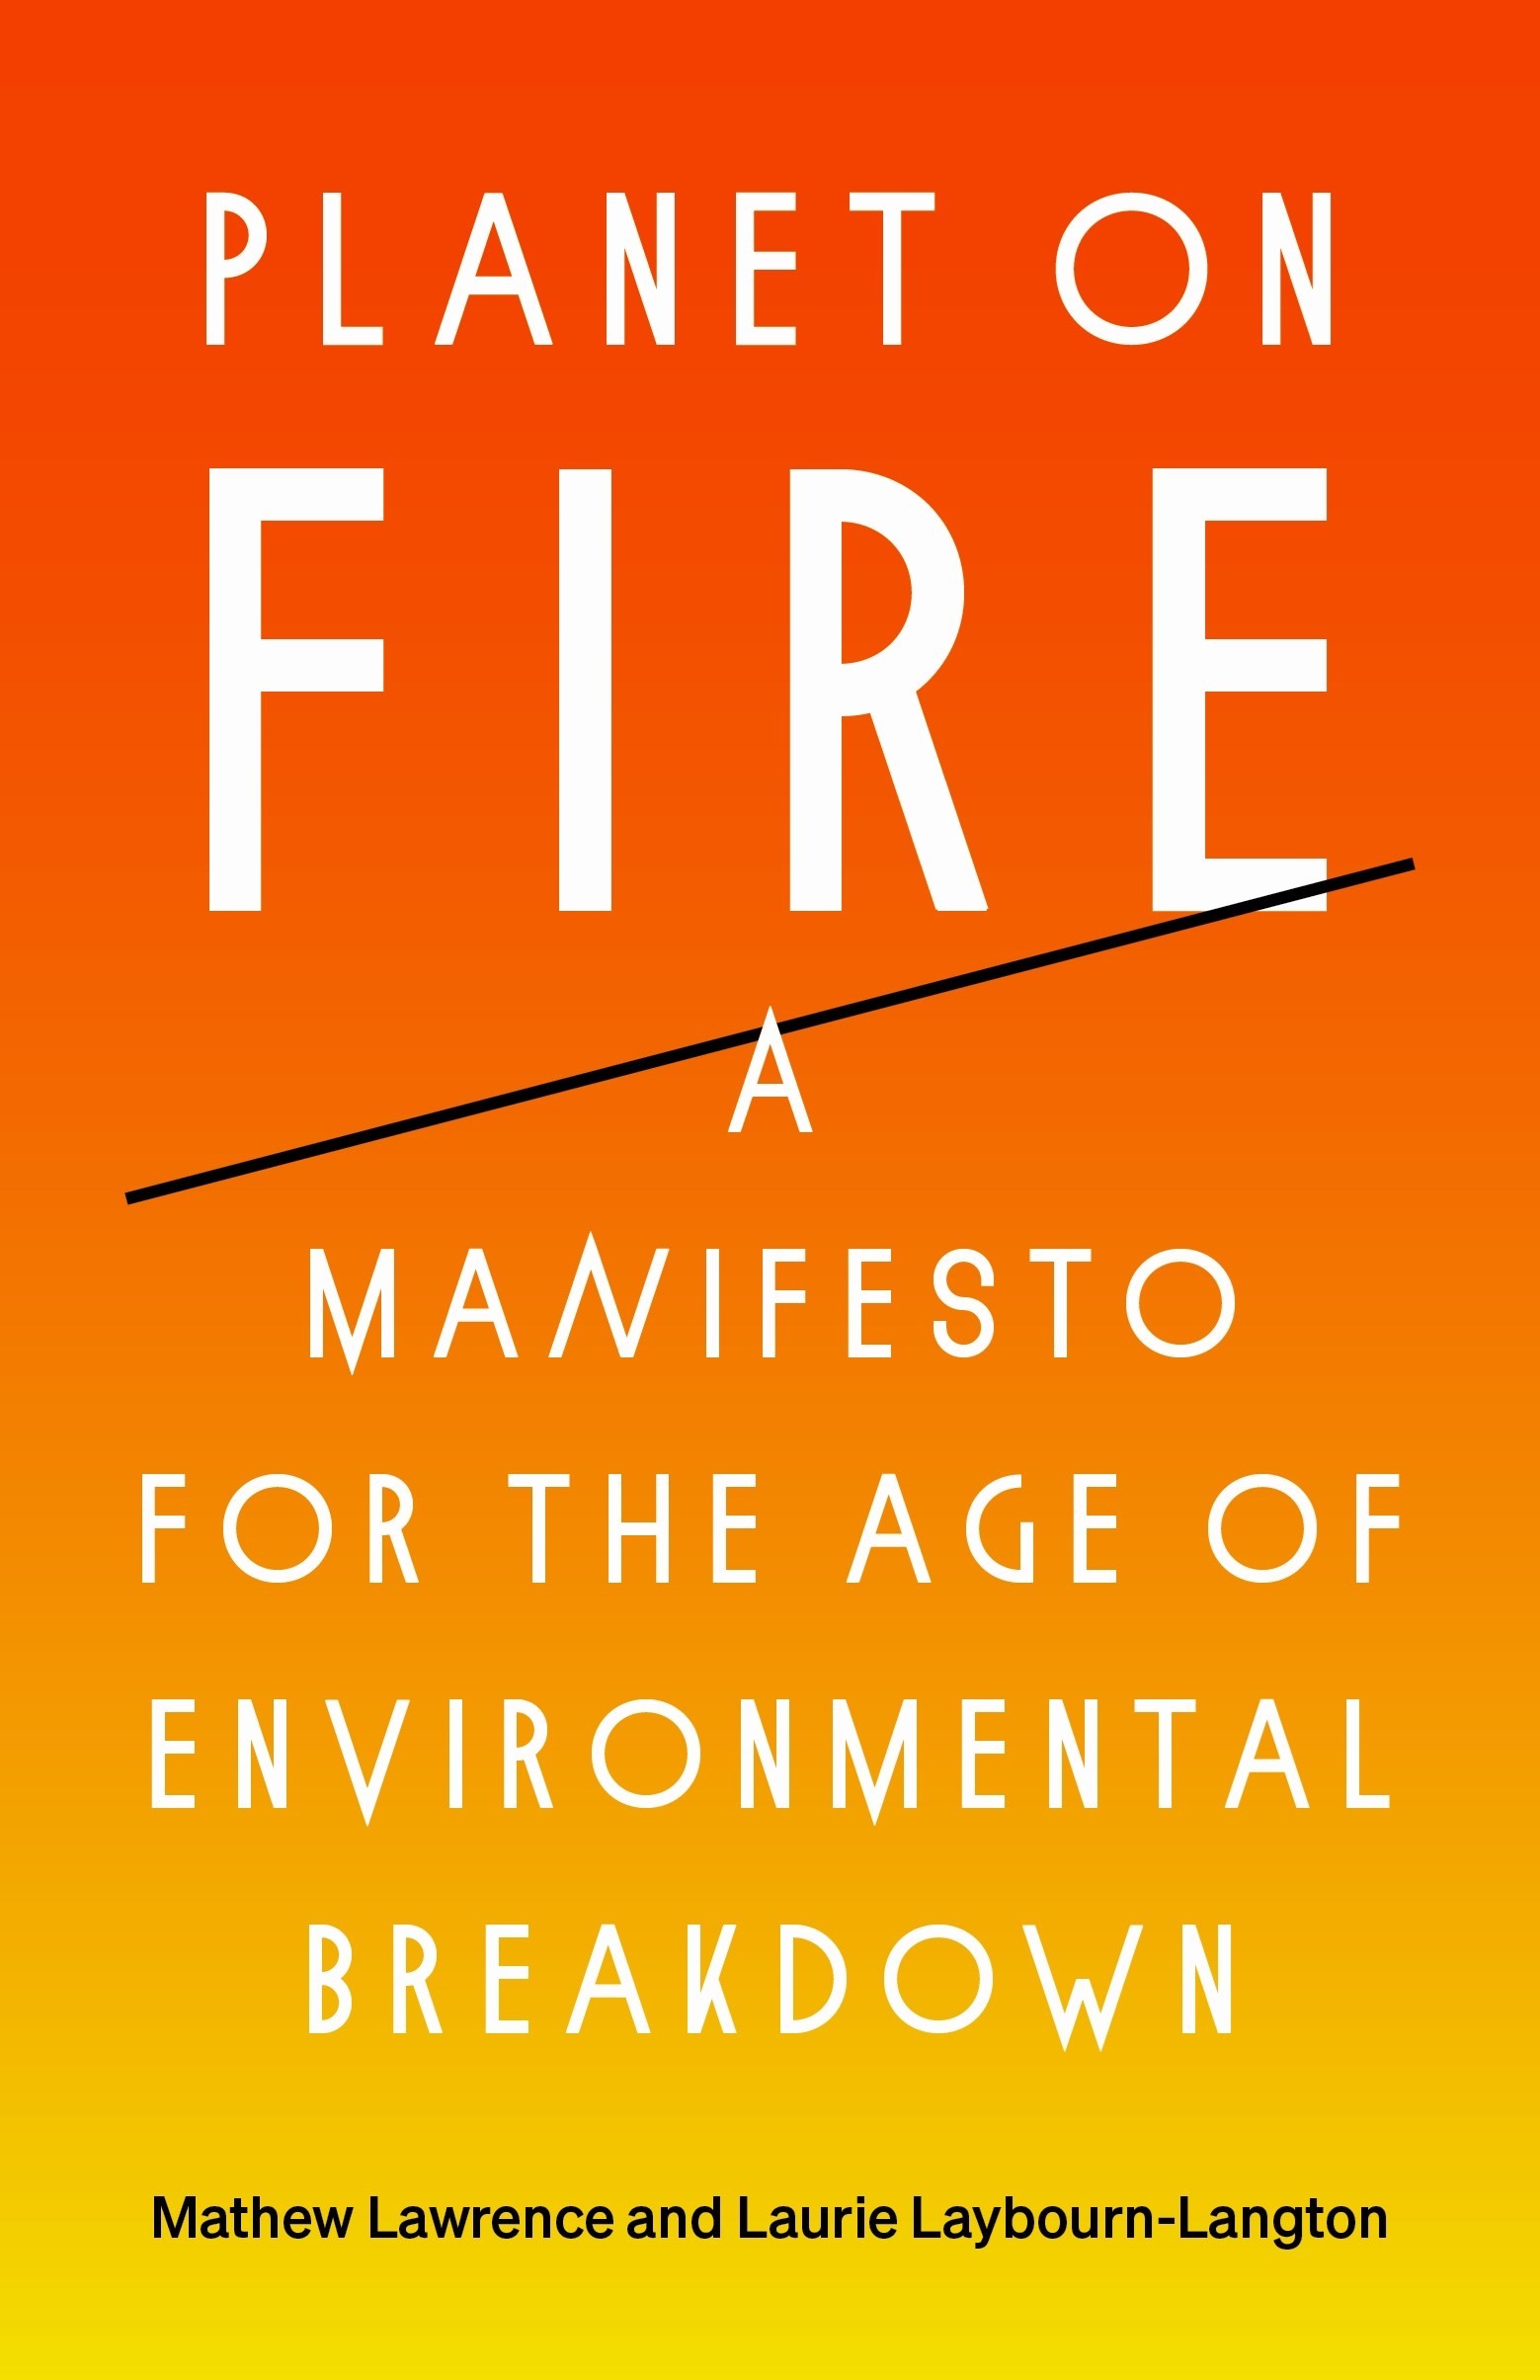 A Manifesto for the Age of Environmental Breakdown